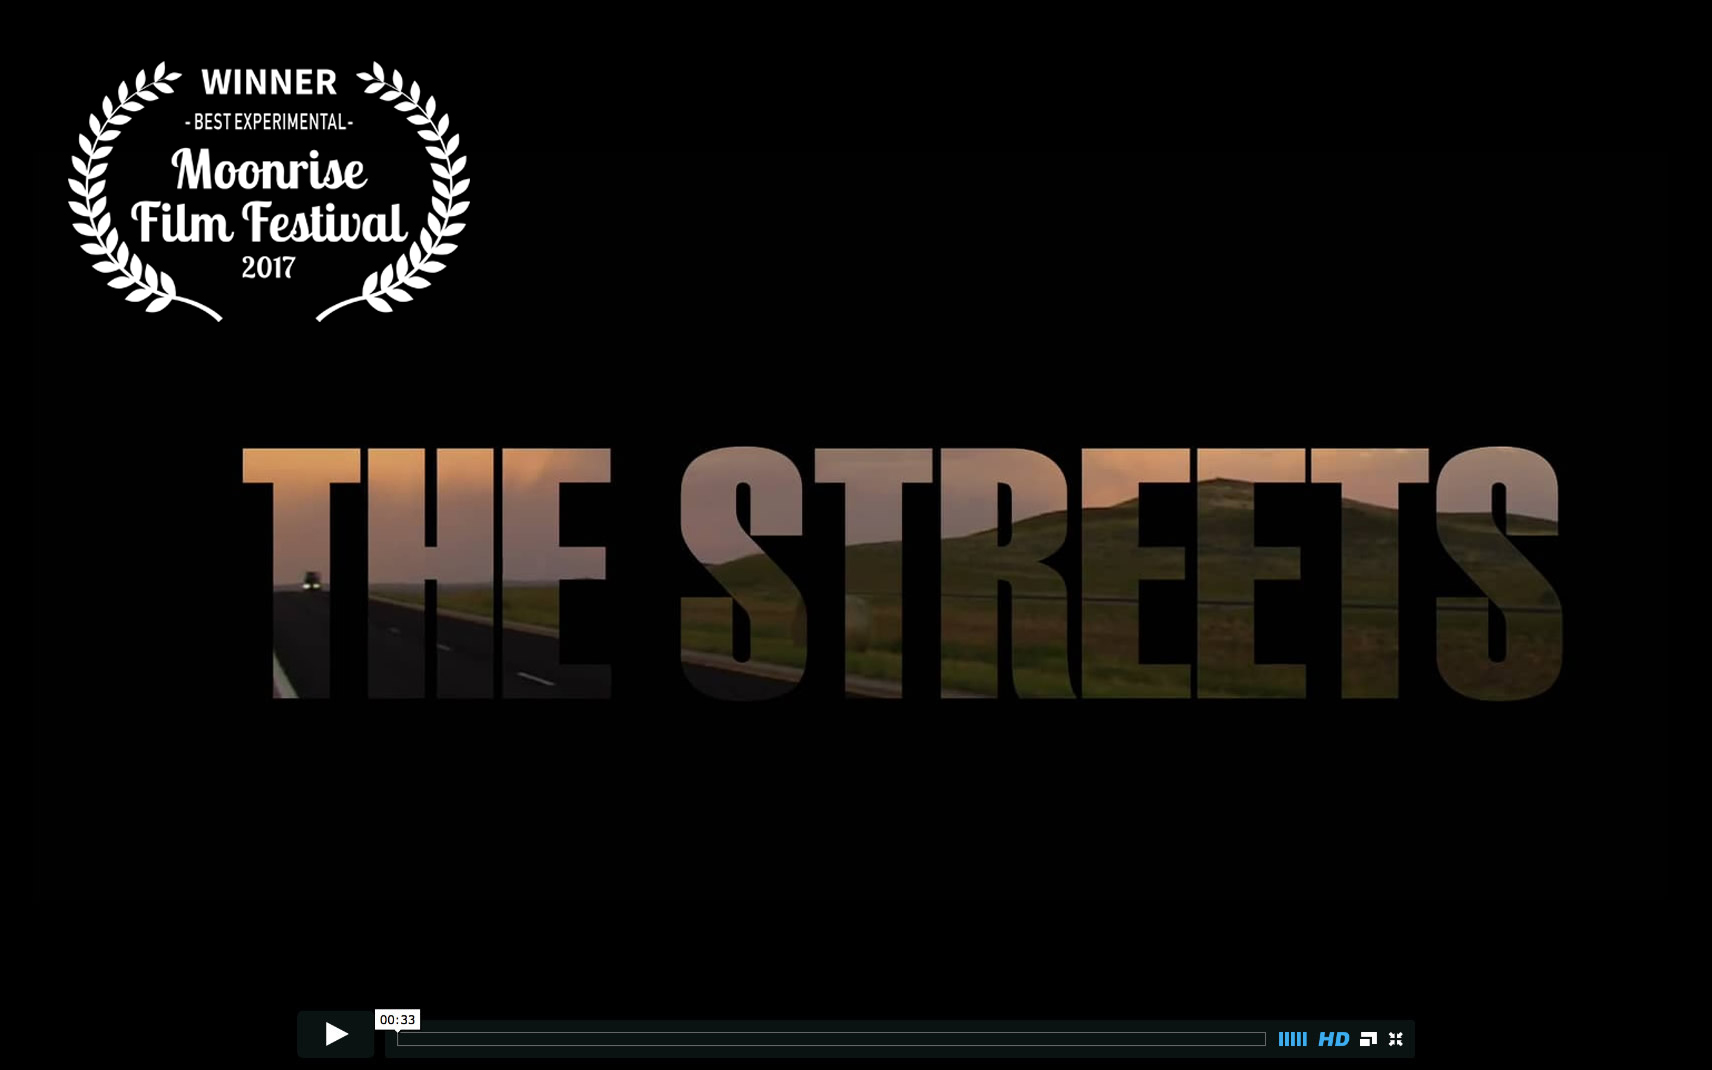 The Streets Trailer